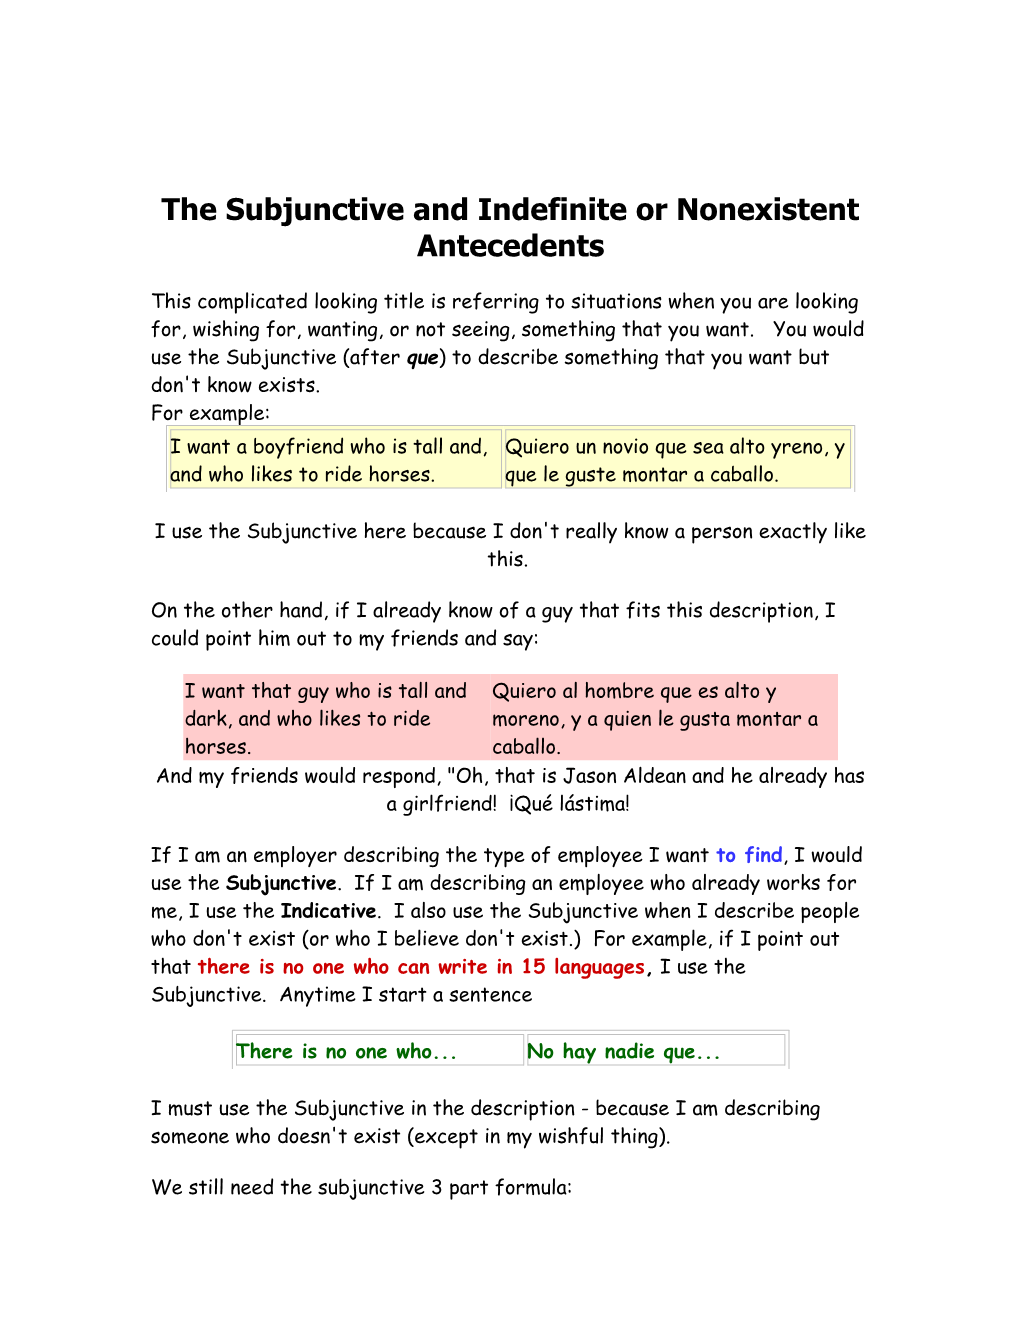 The Subjunctive and Indefinite Or Nonexistent Antecedents